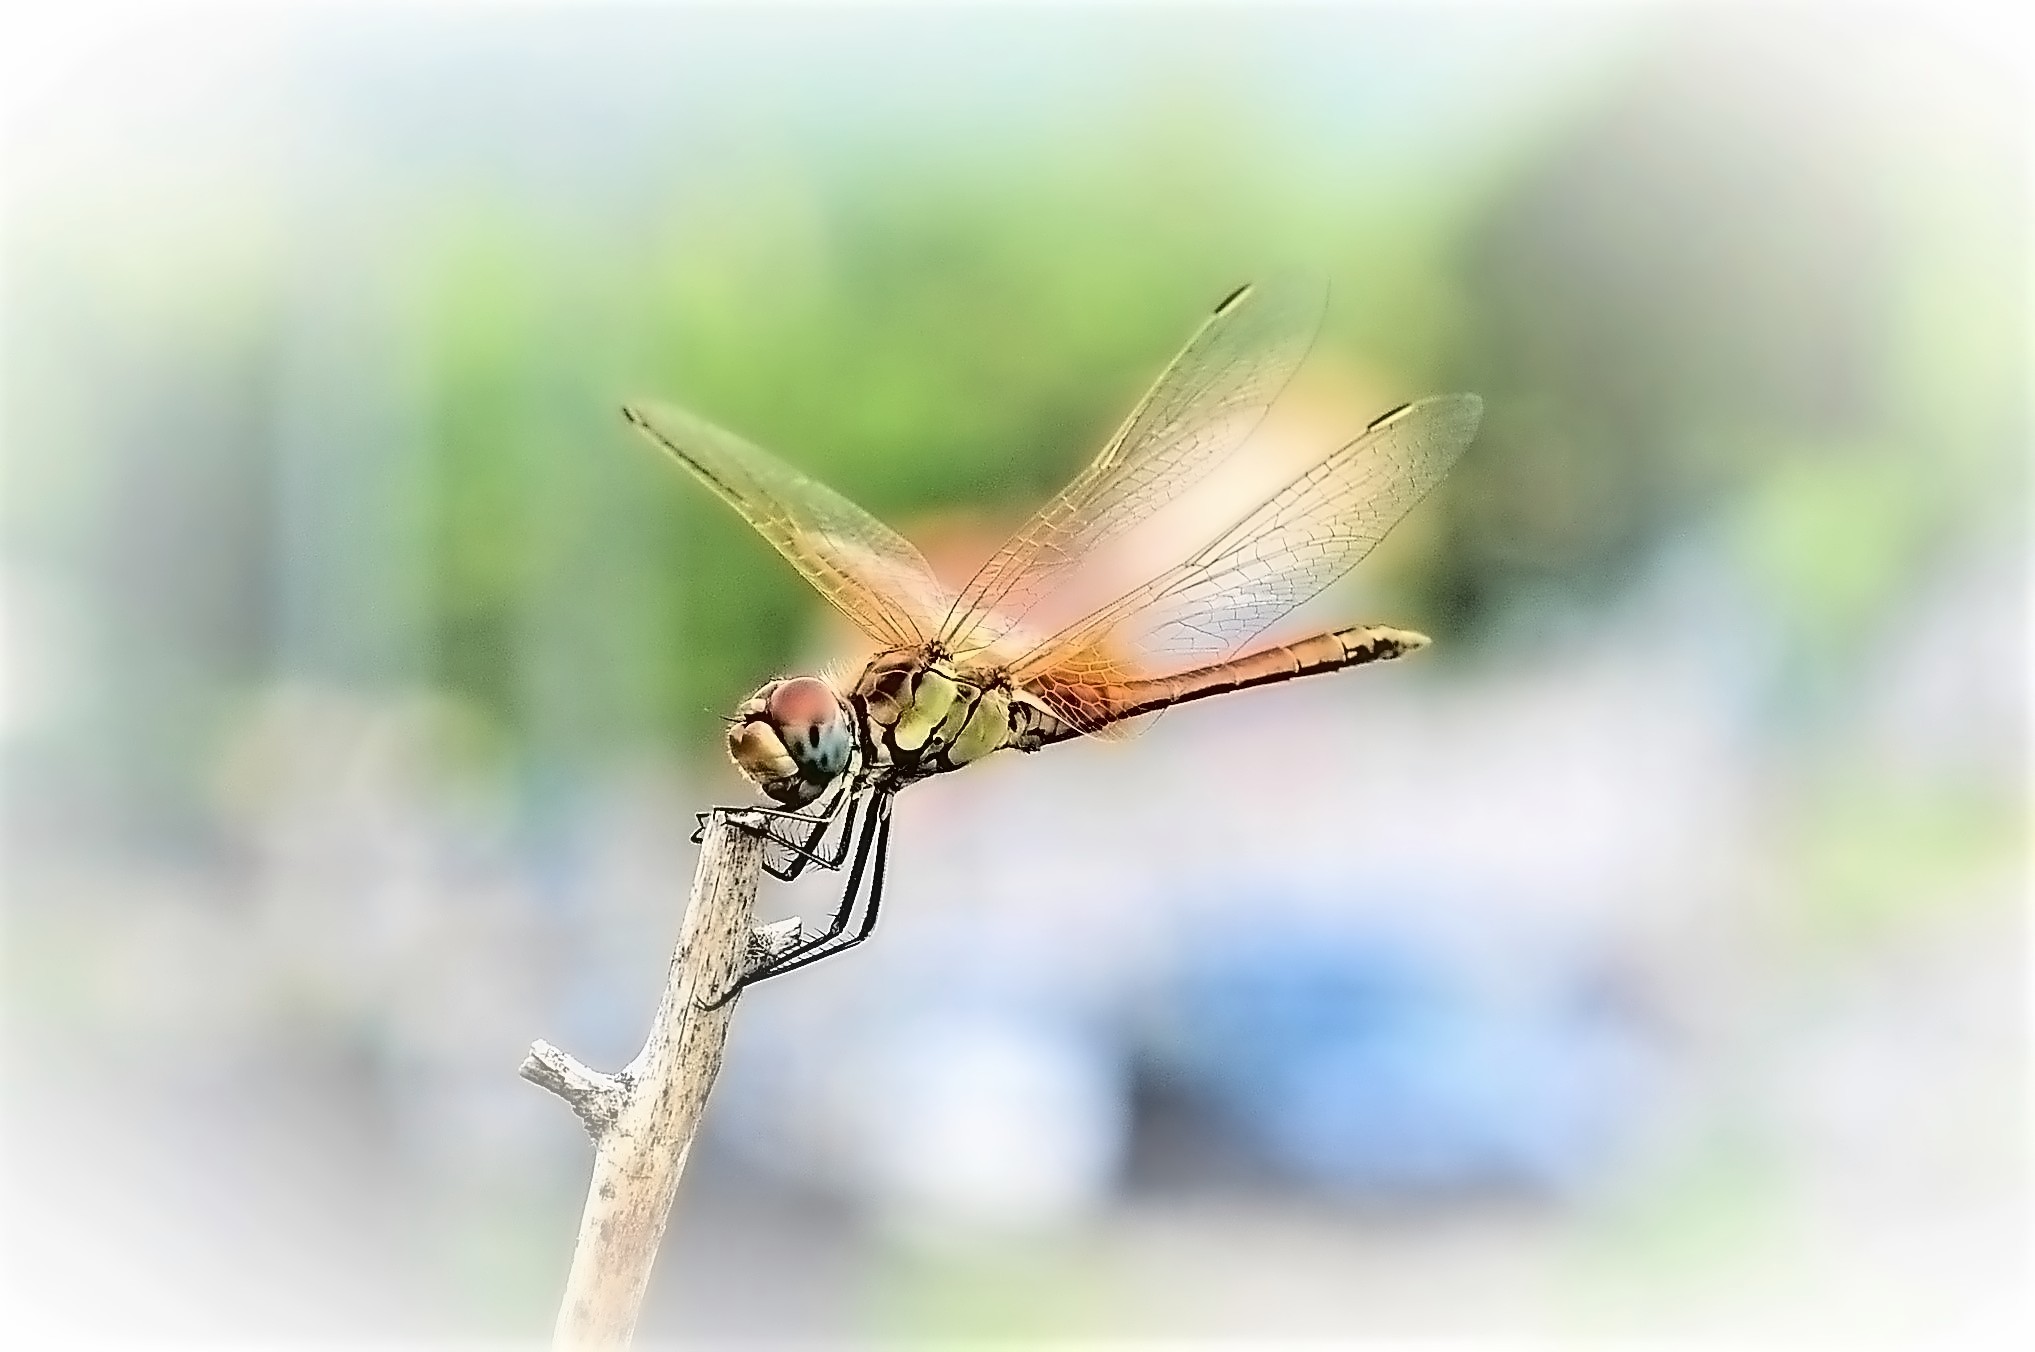 The dragonfly....